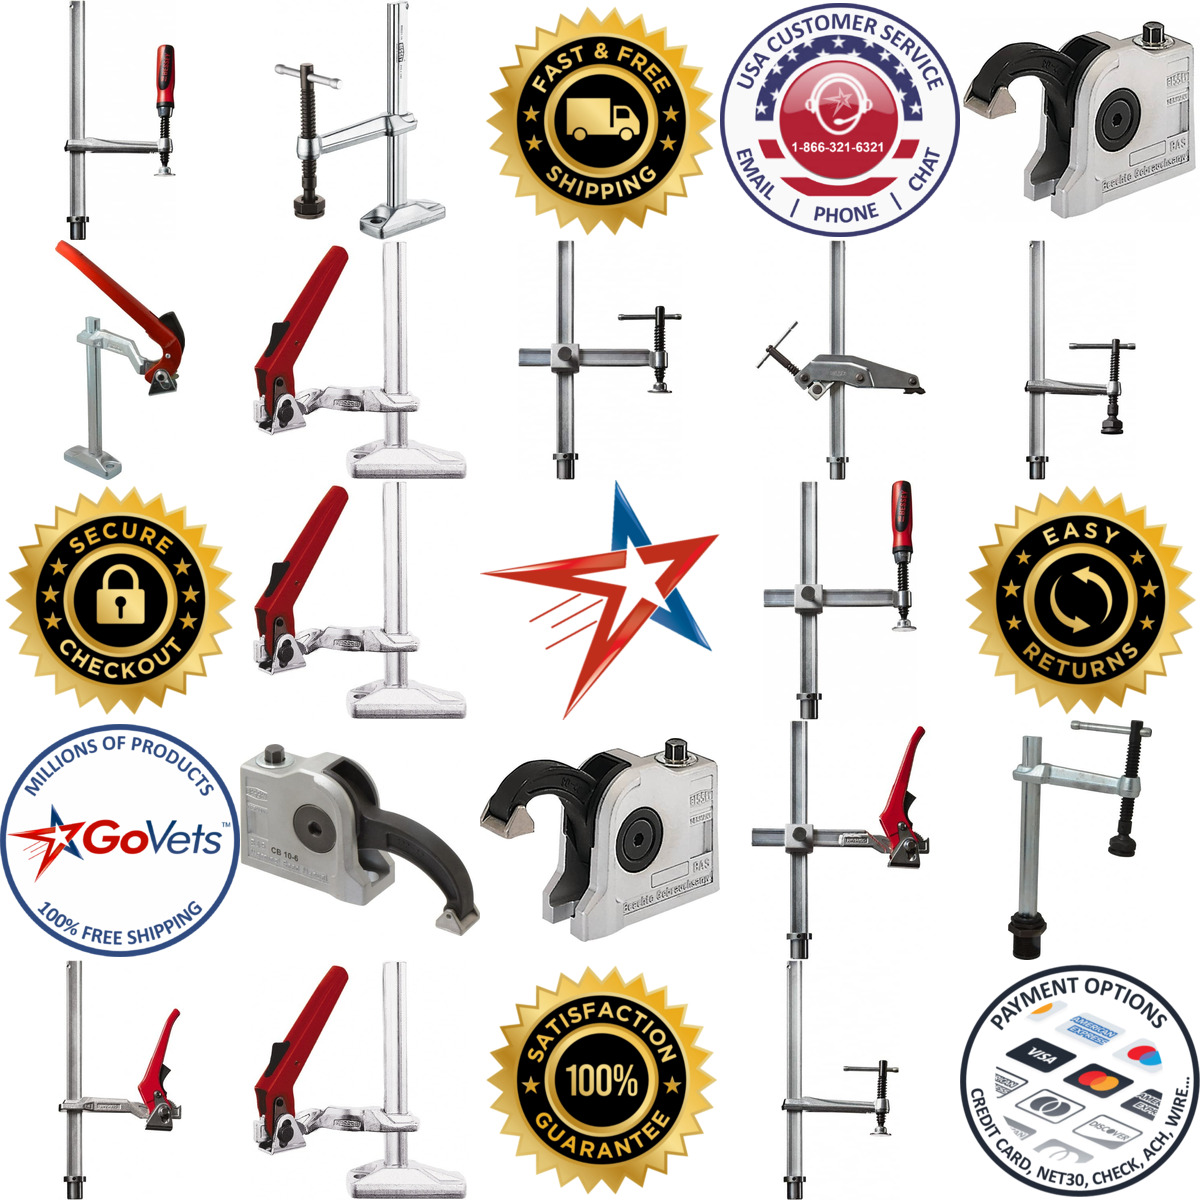 A selection of Bessey products on GoVets